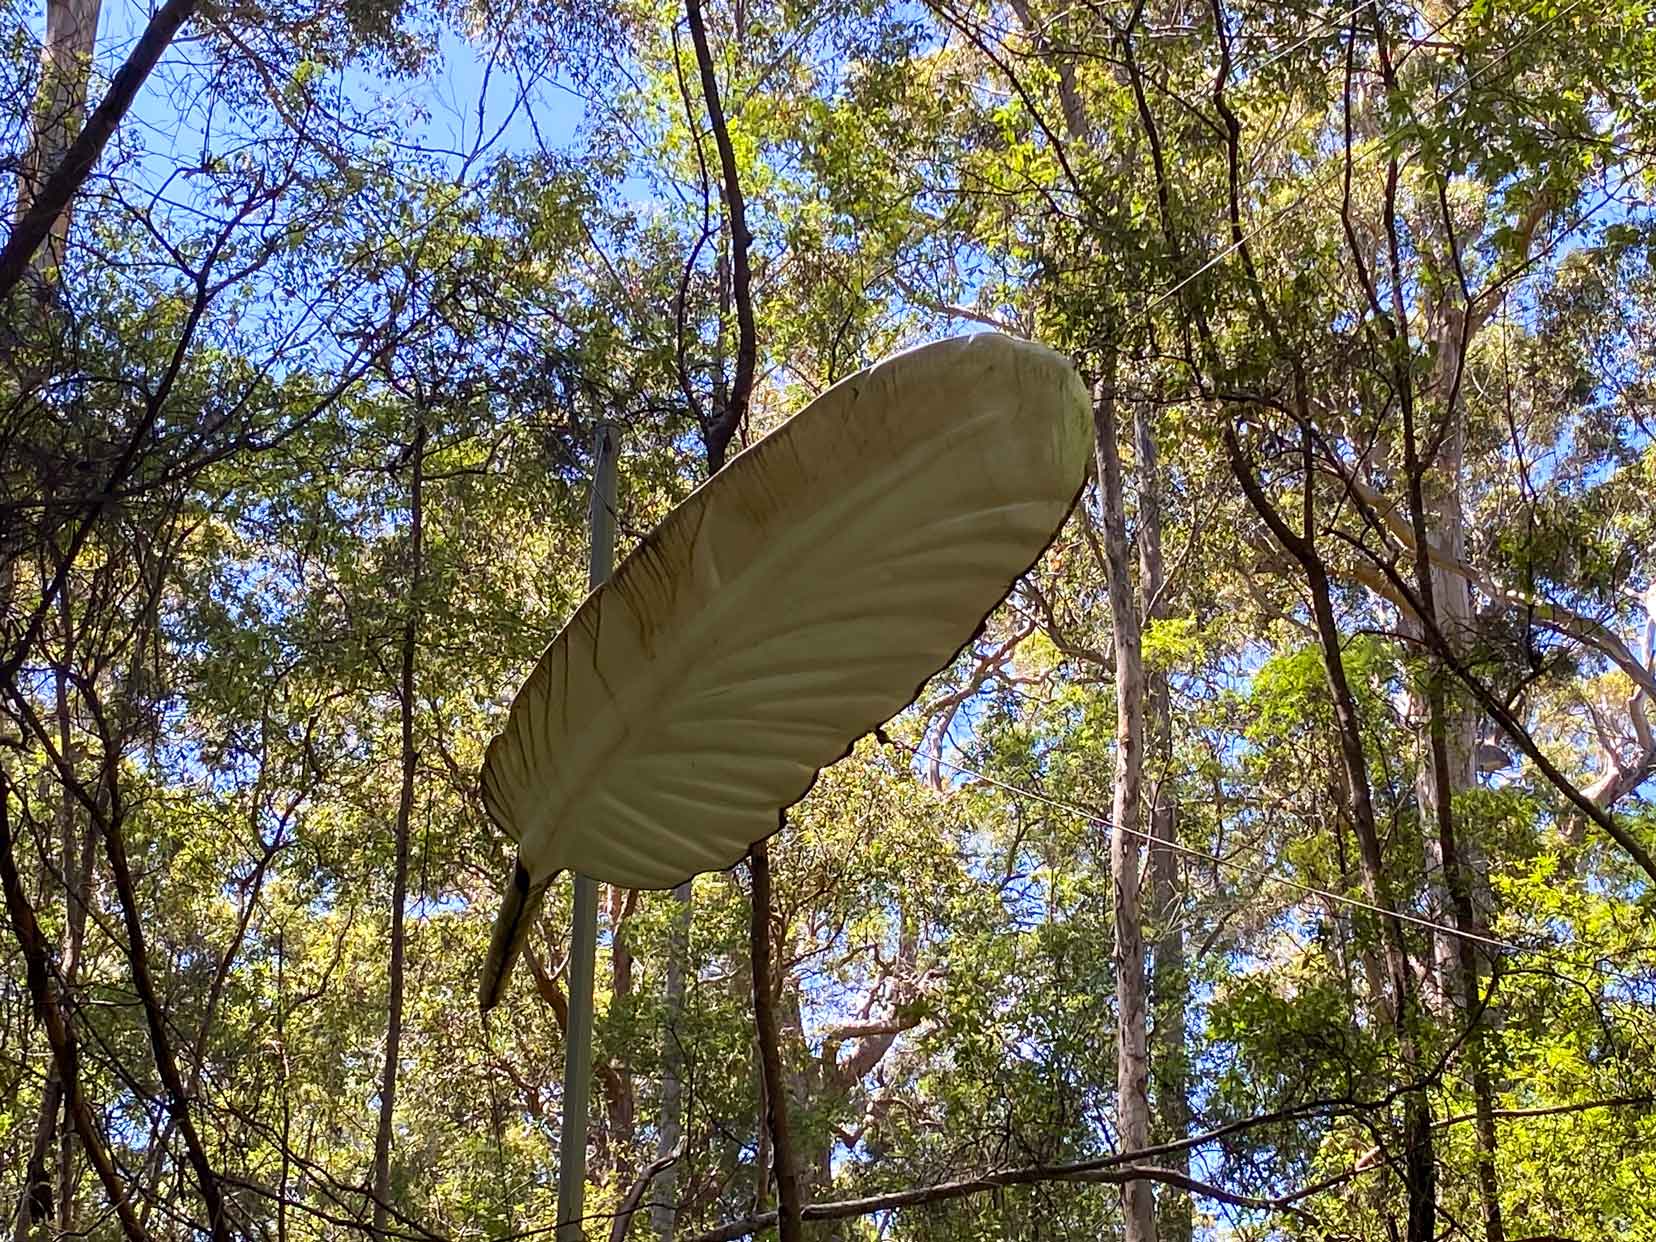 Huge white feather suspended between the forest trees